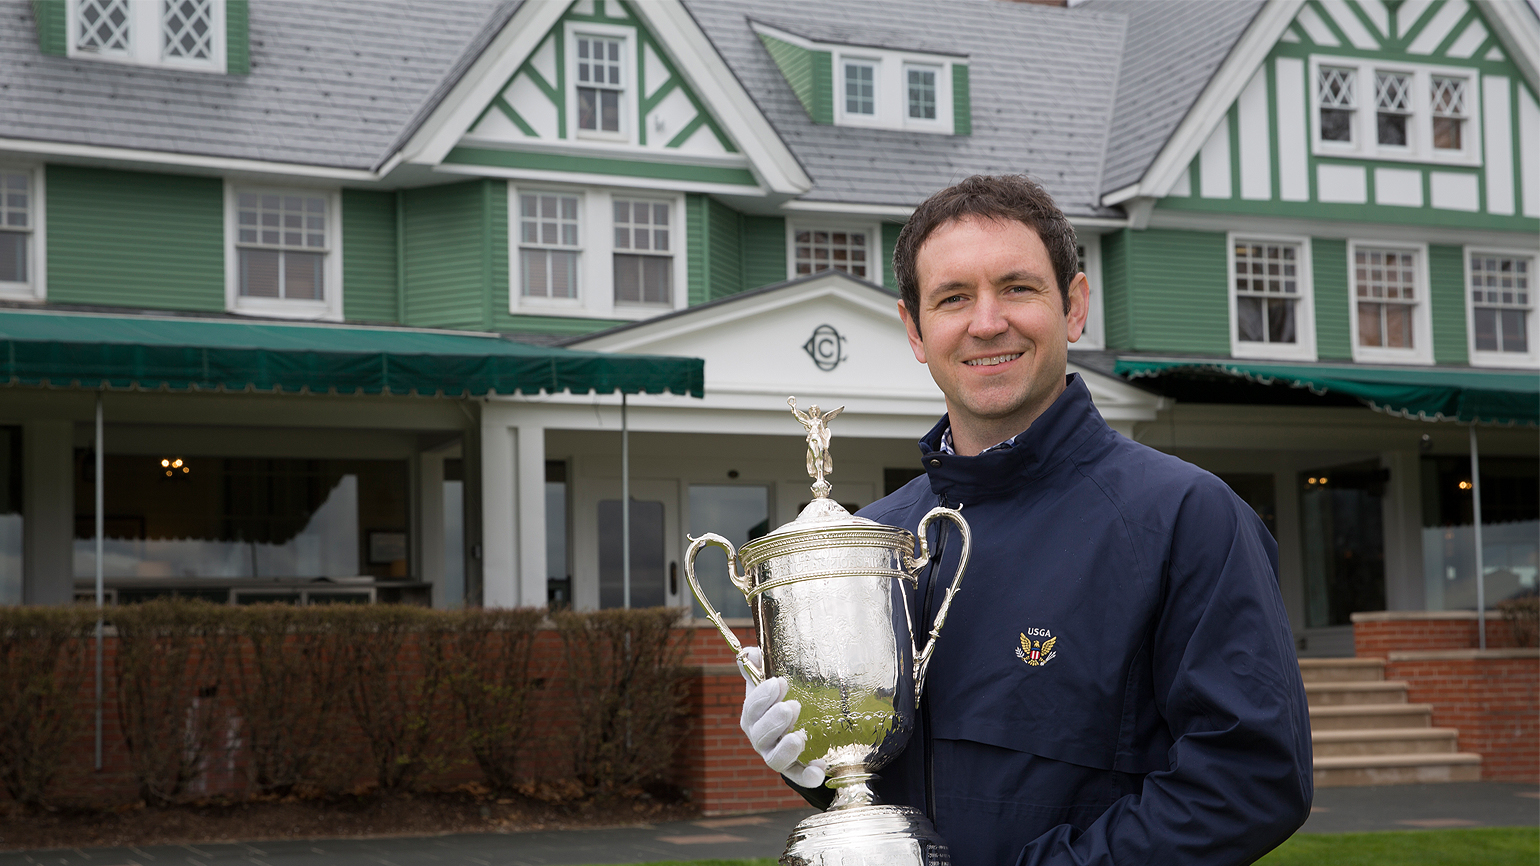 Man standing in front of golf clubhouse while holding trophy